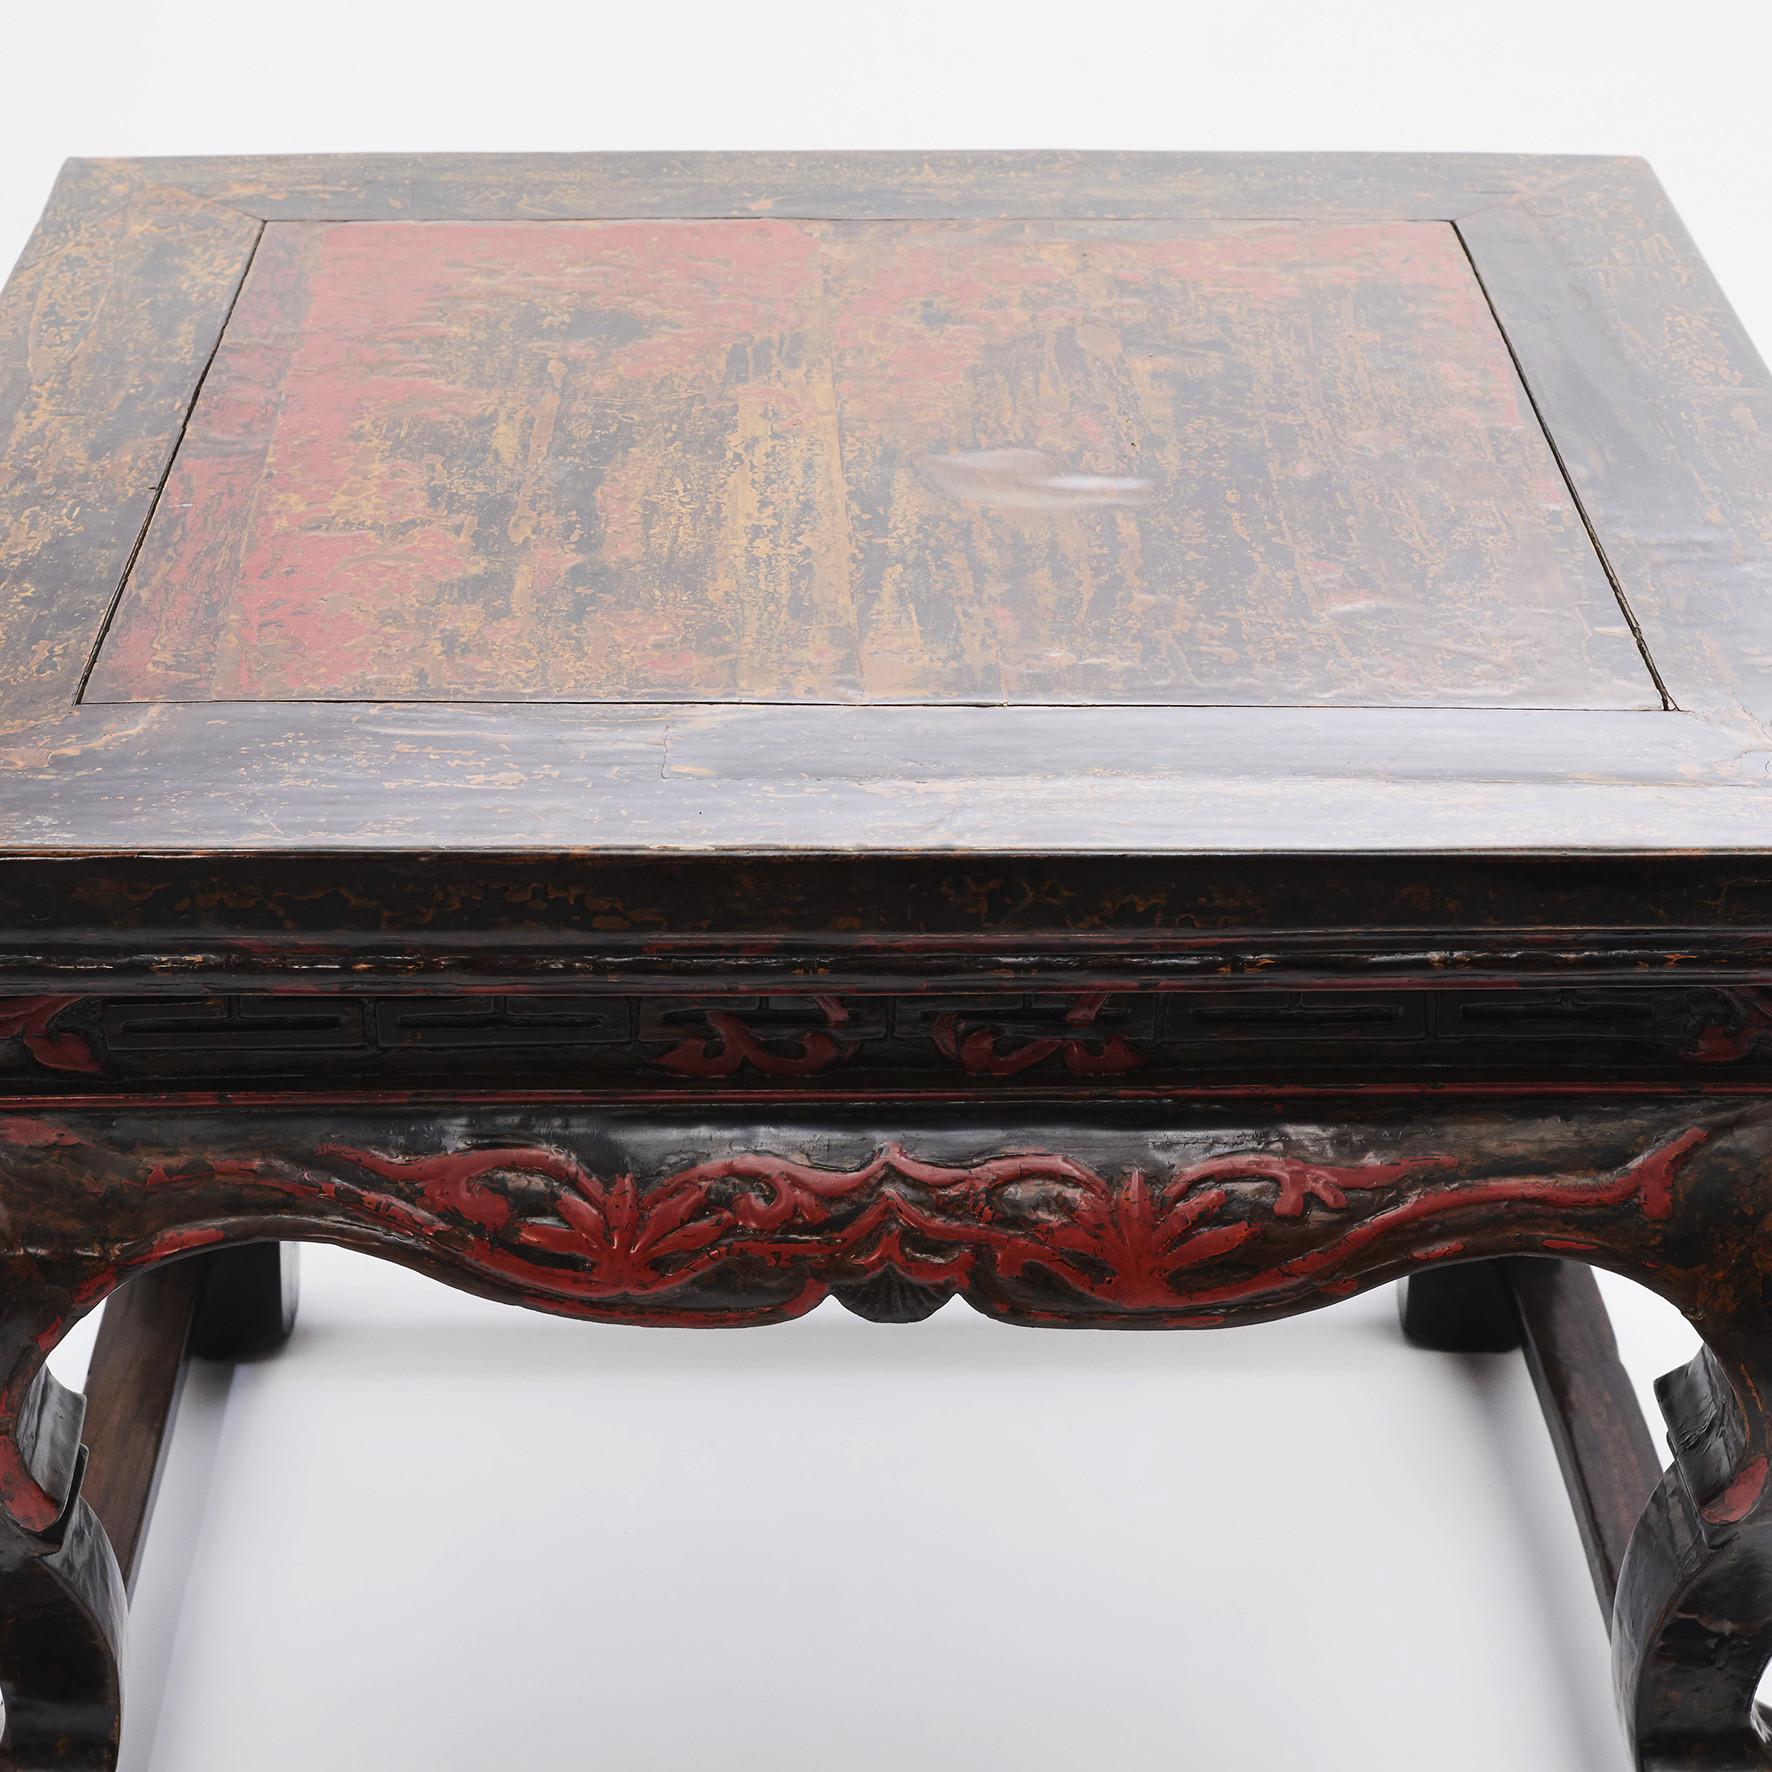 Chinese center table. Original condition and black / red lacquer.
Finely carved scalloped apron accented with scrolling foliage motifs.
Resting on four saber legs ending in claw and ball.
The table features its original patina with wear according to